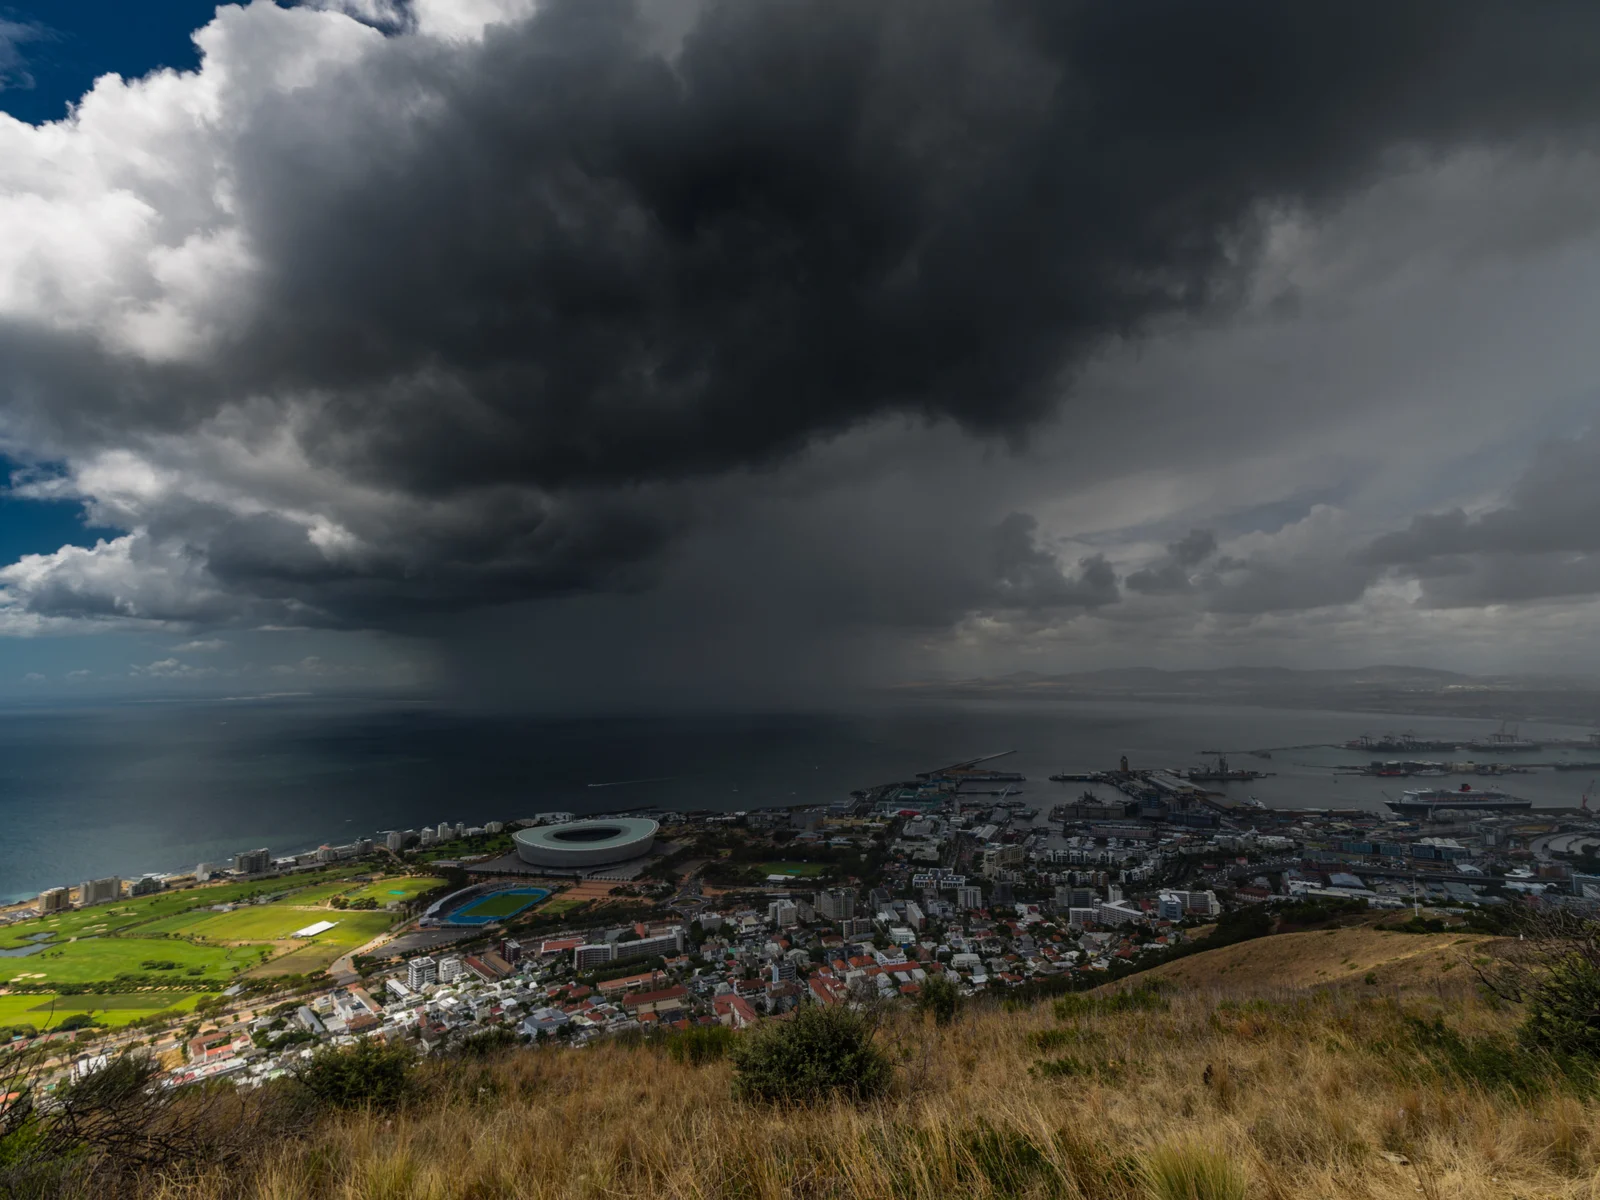 Cape town as seen from the hills with a storm cloud over the city and stadium during the worst time to visit South Africa